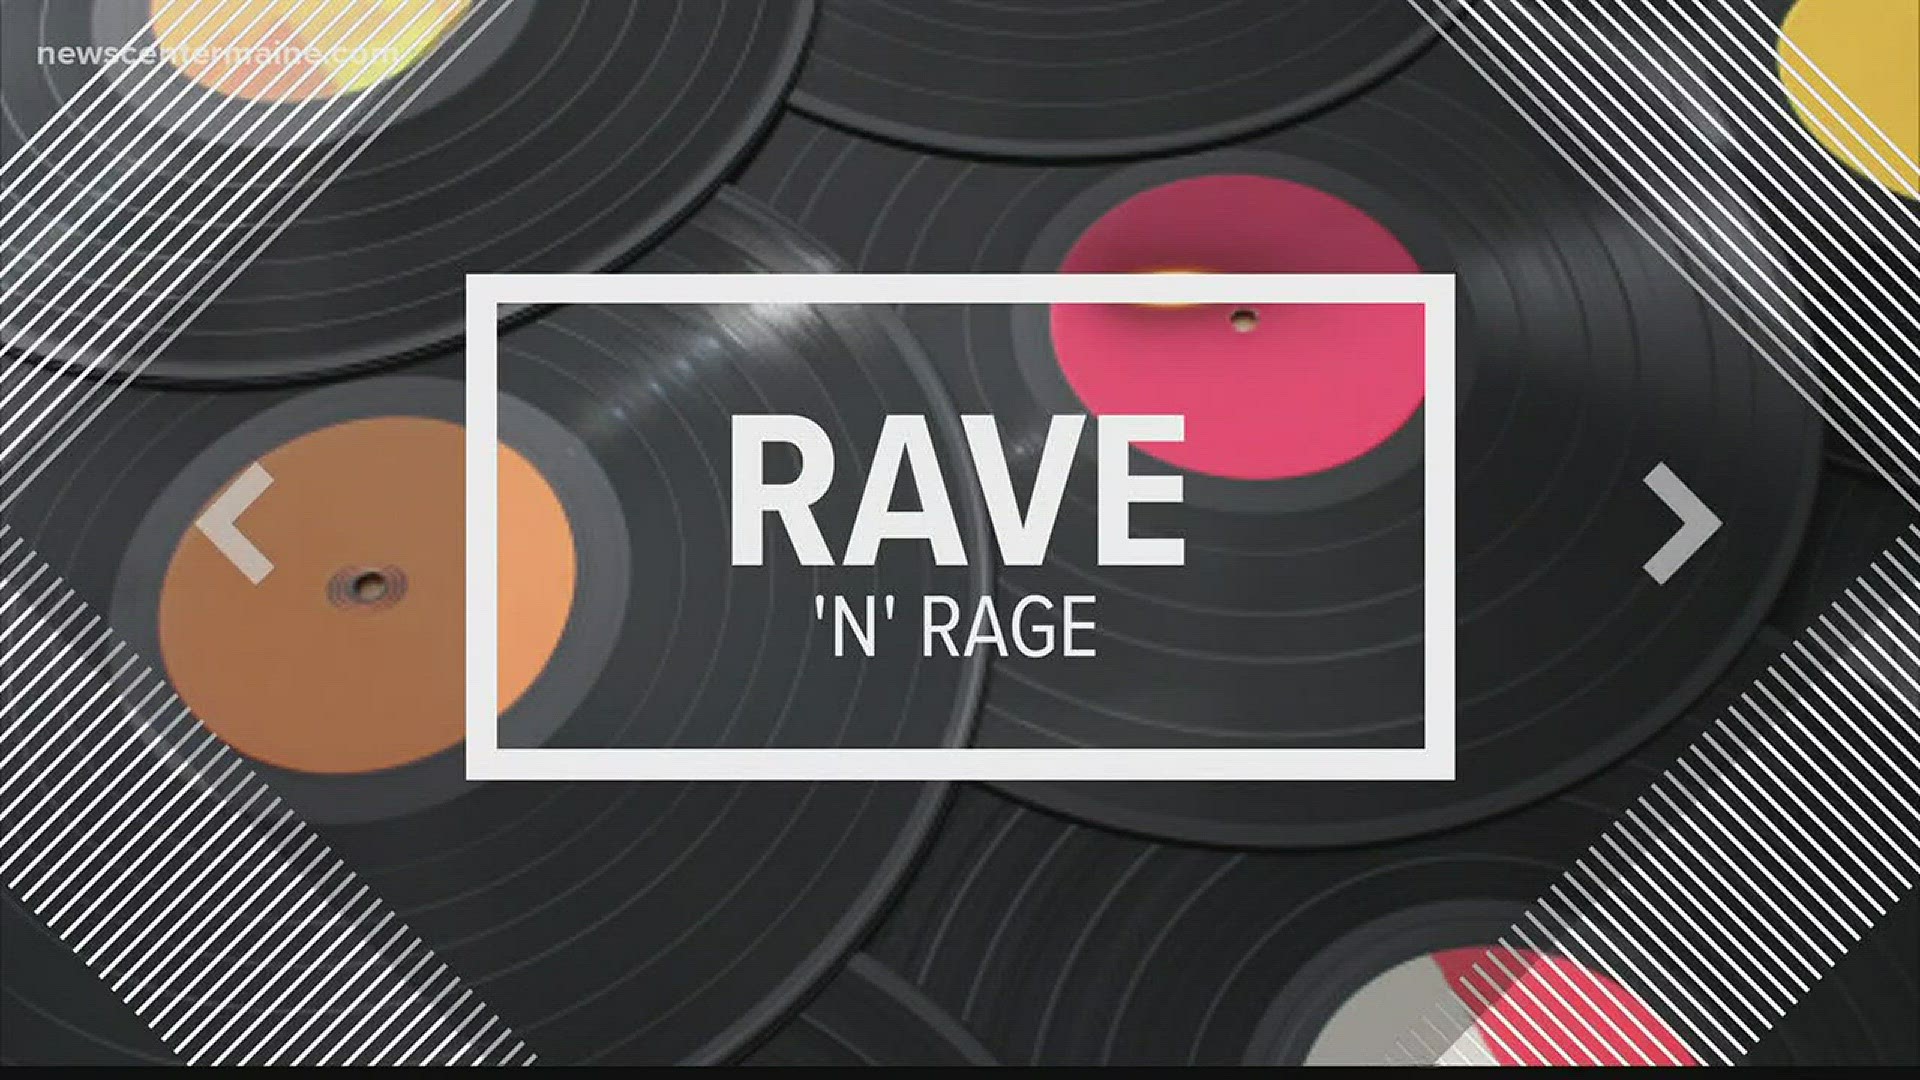 Rave 'n' Rage with Xander Nelson